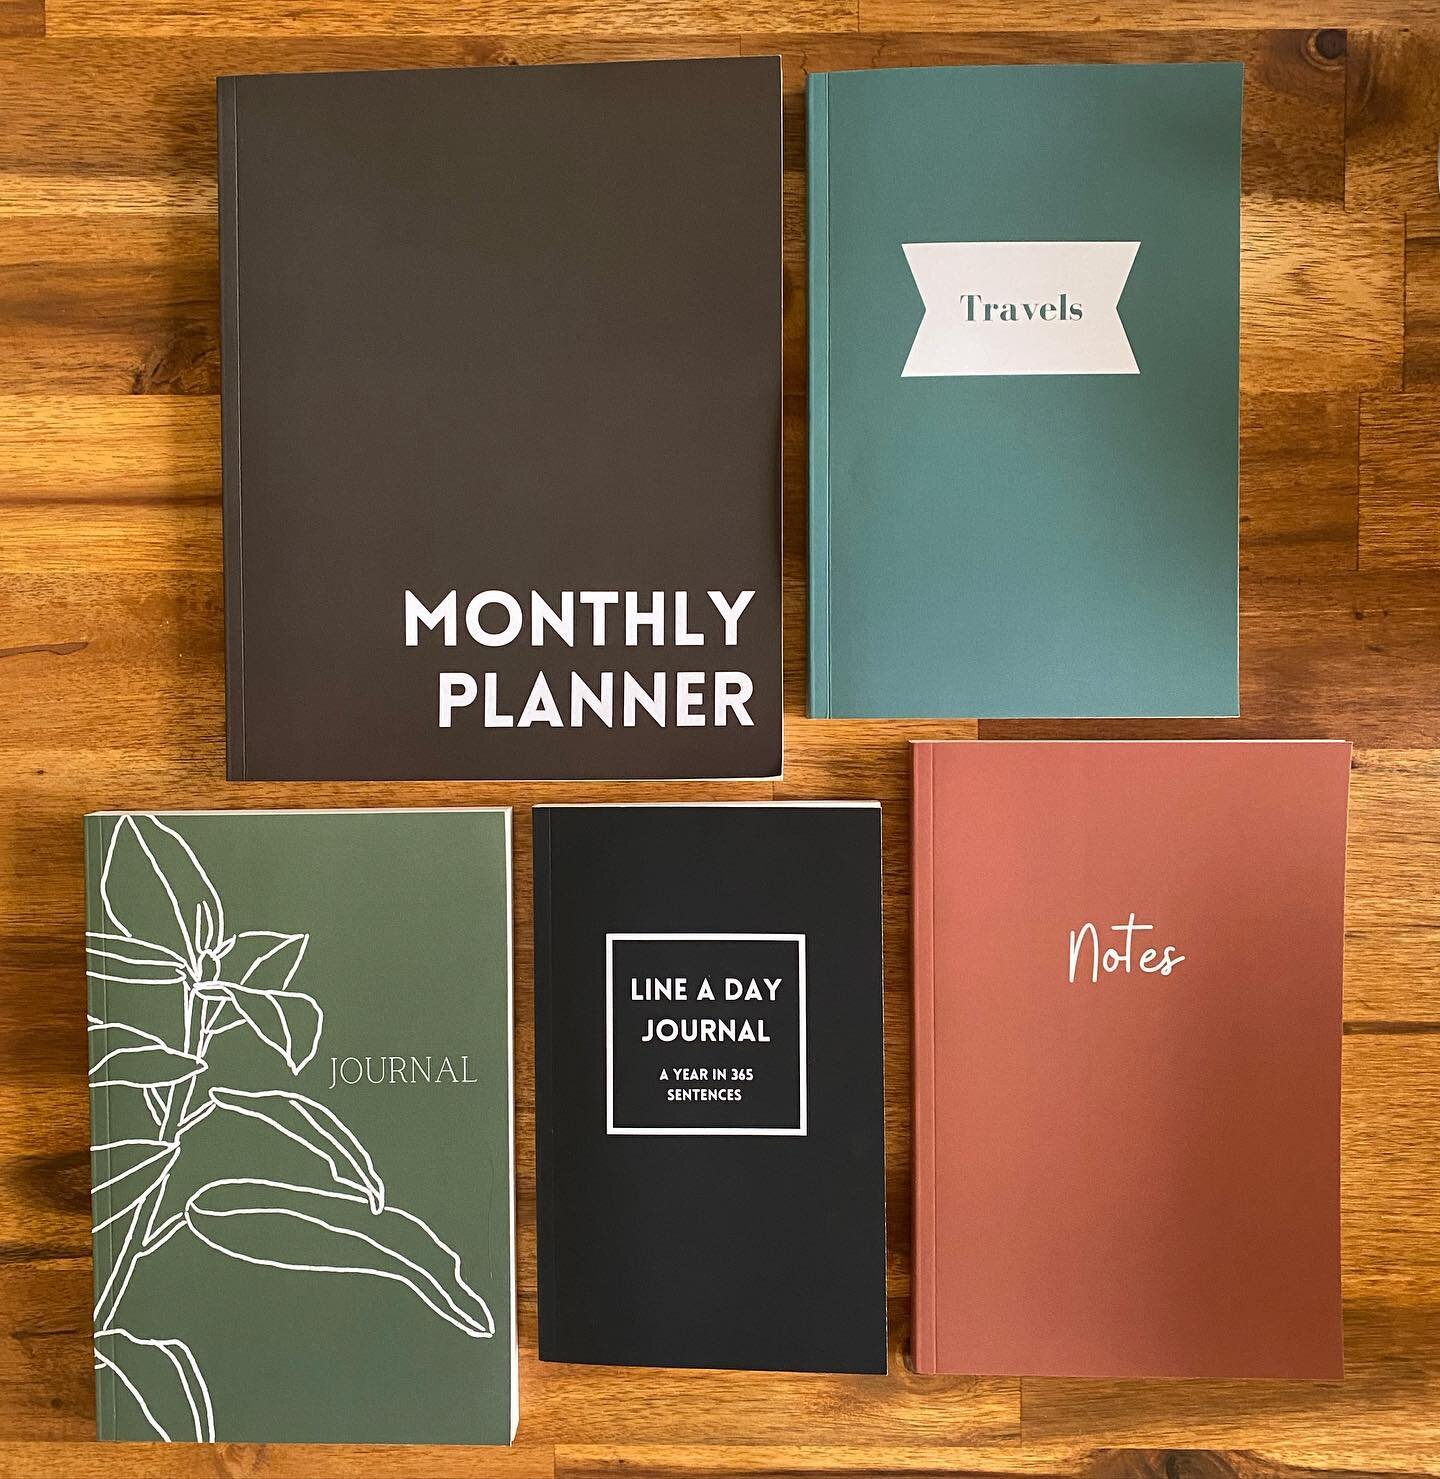 All my fave new fall notebooks! (If you need a monthly planner this one&rsquo;s awesome&mdash;I linked it in my profile) #notebooks #fallbooks #backtoschool